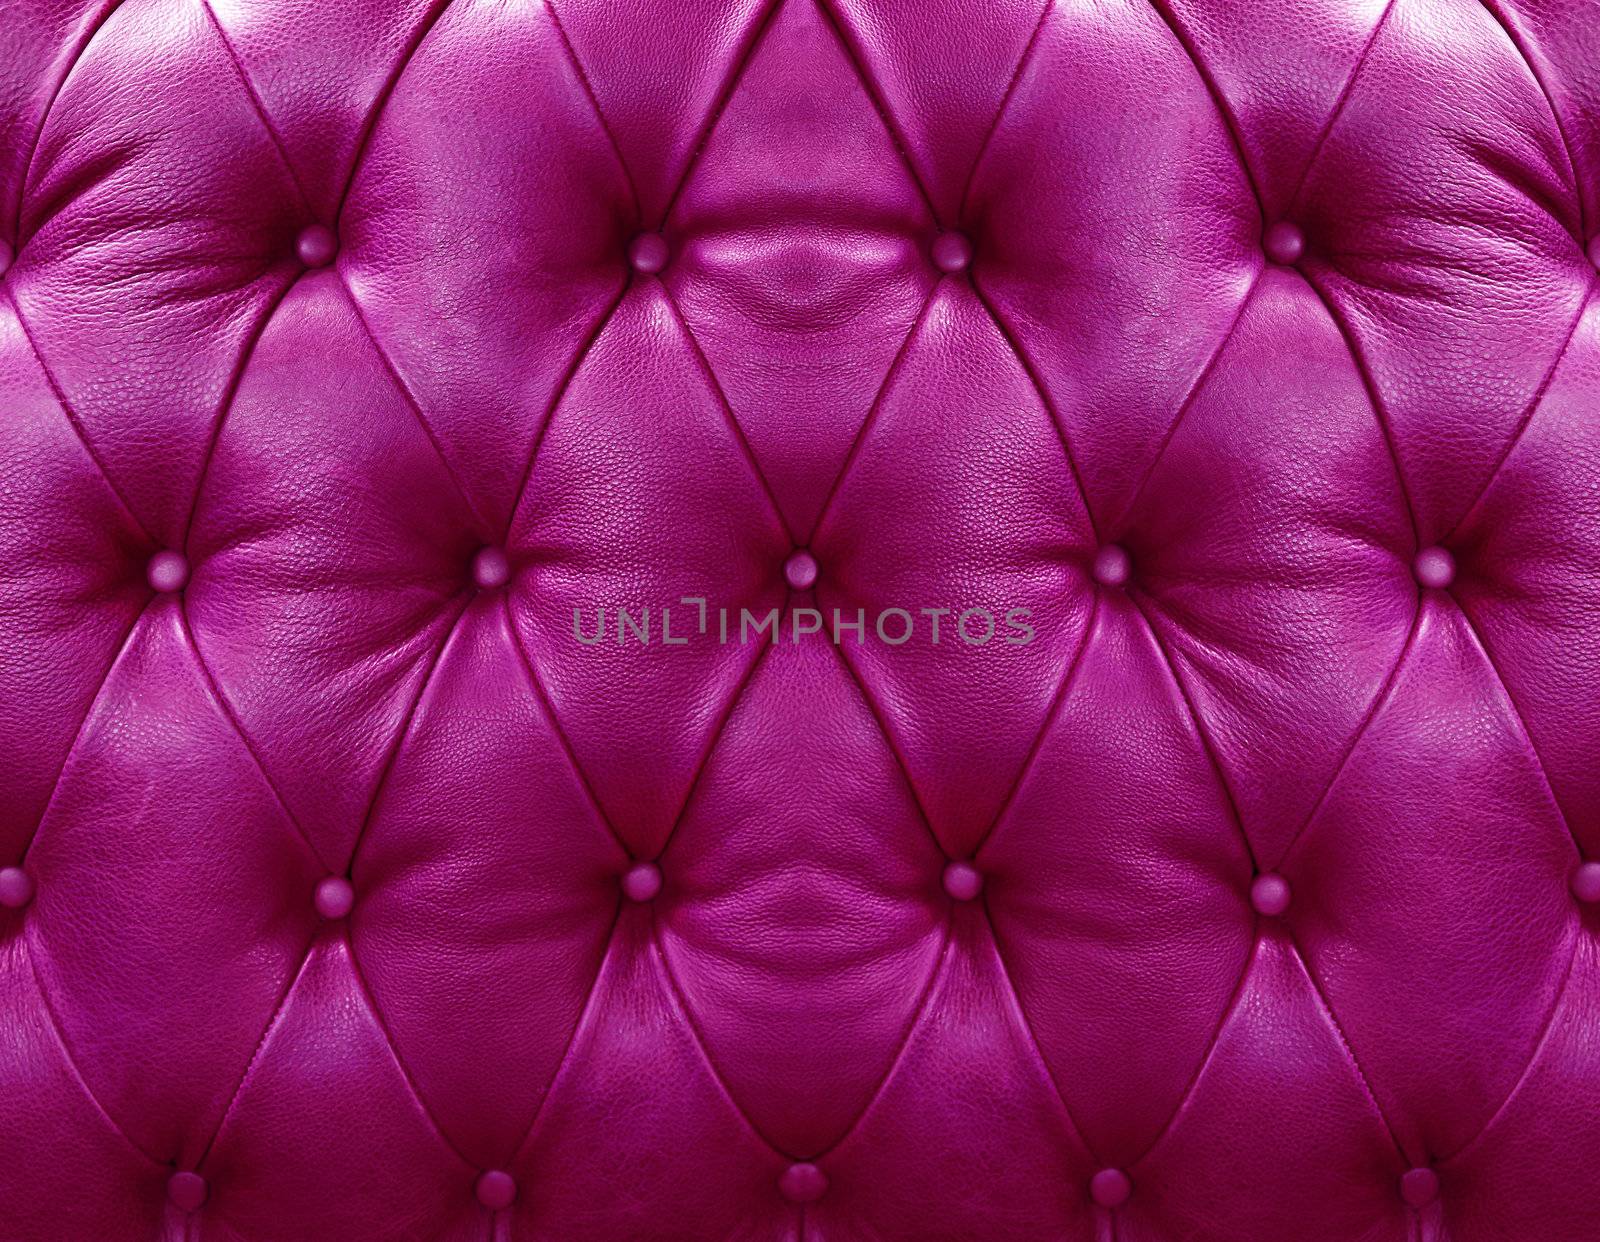 Pink upholstery leather pattern background